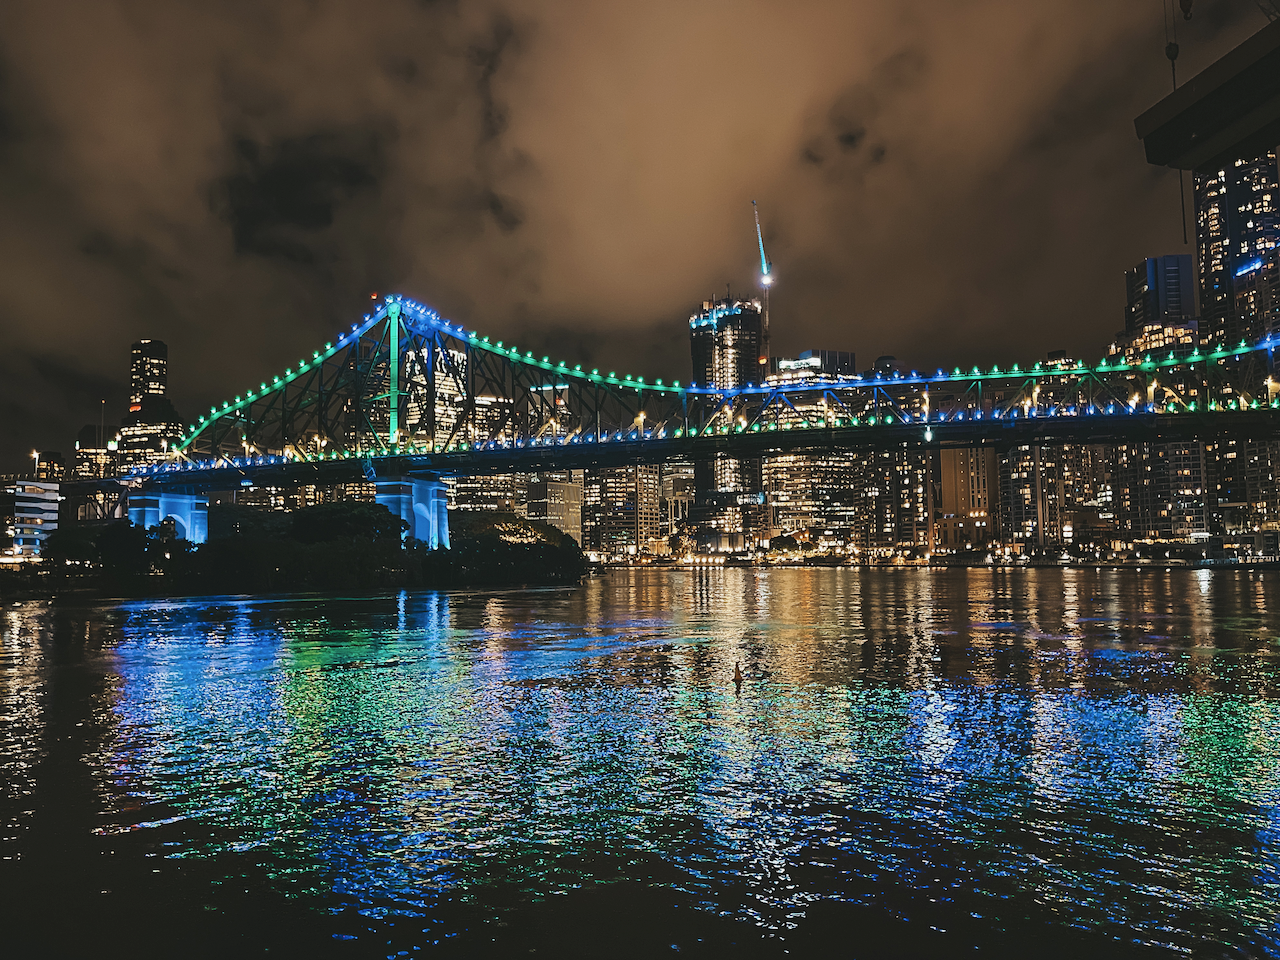 The Story Bridge lit up at night from Howard Smith Wharves - Brisbane - Queensland - Australia